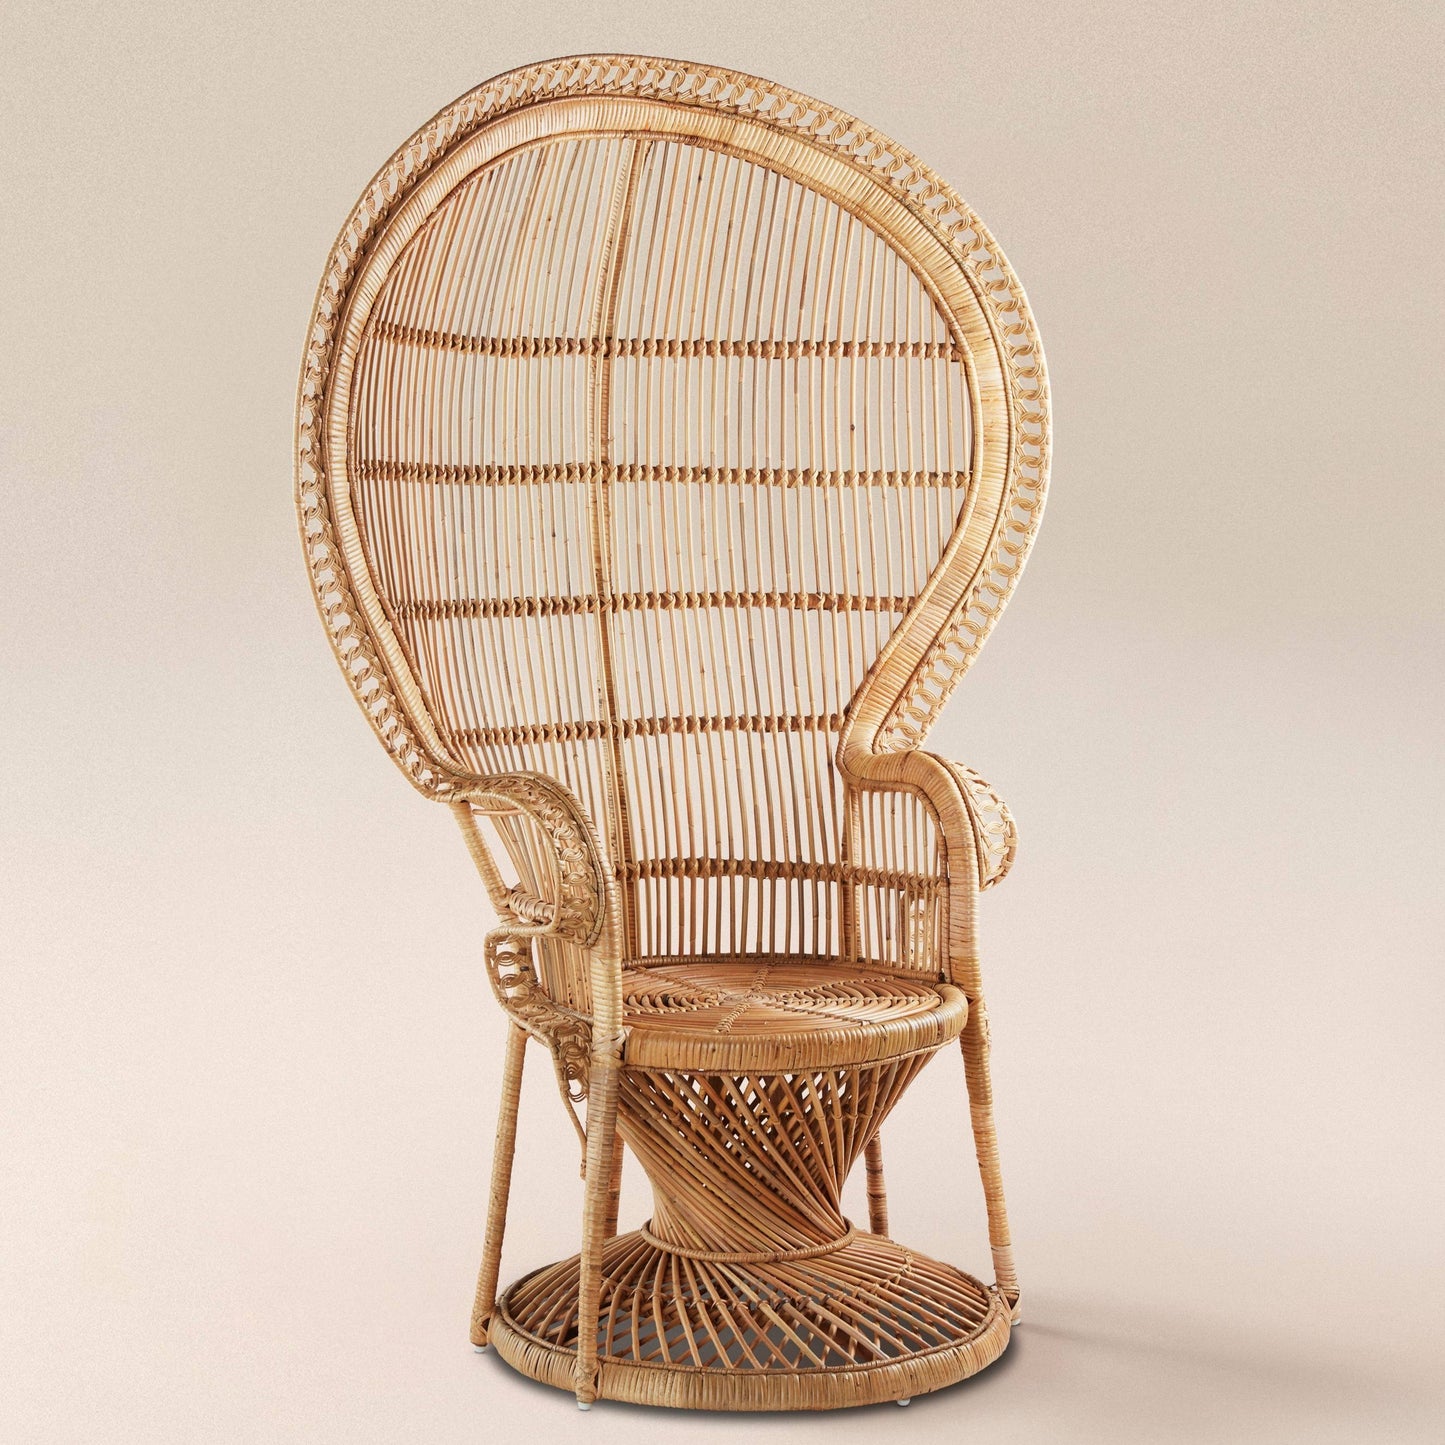 Peacock chair, handwoven in rattan and bamboo. Fair Trade from Malawi